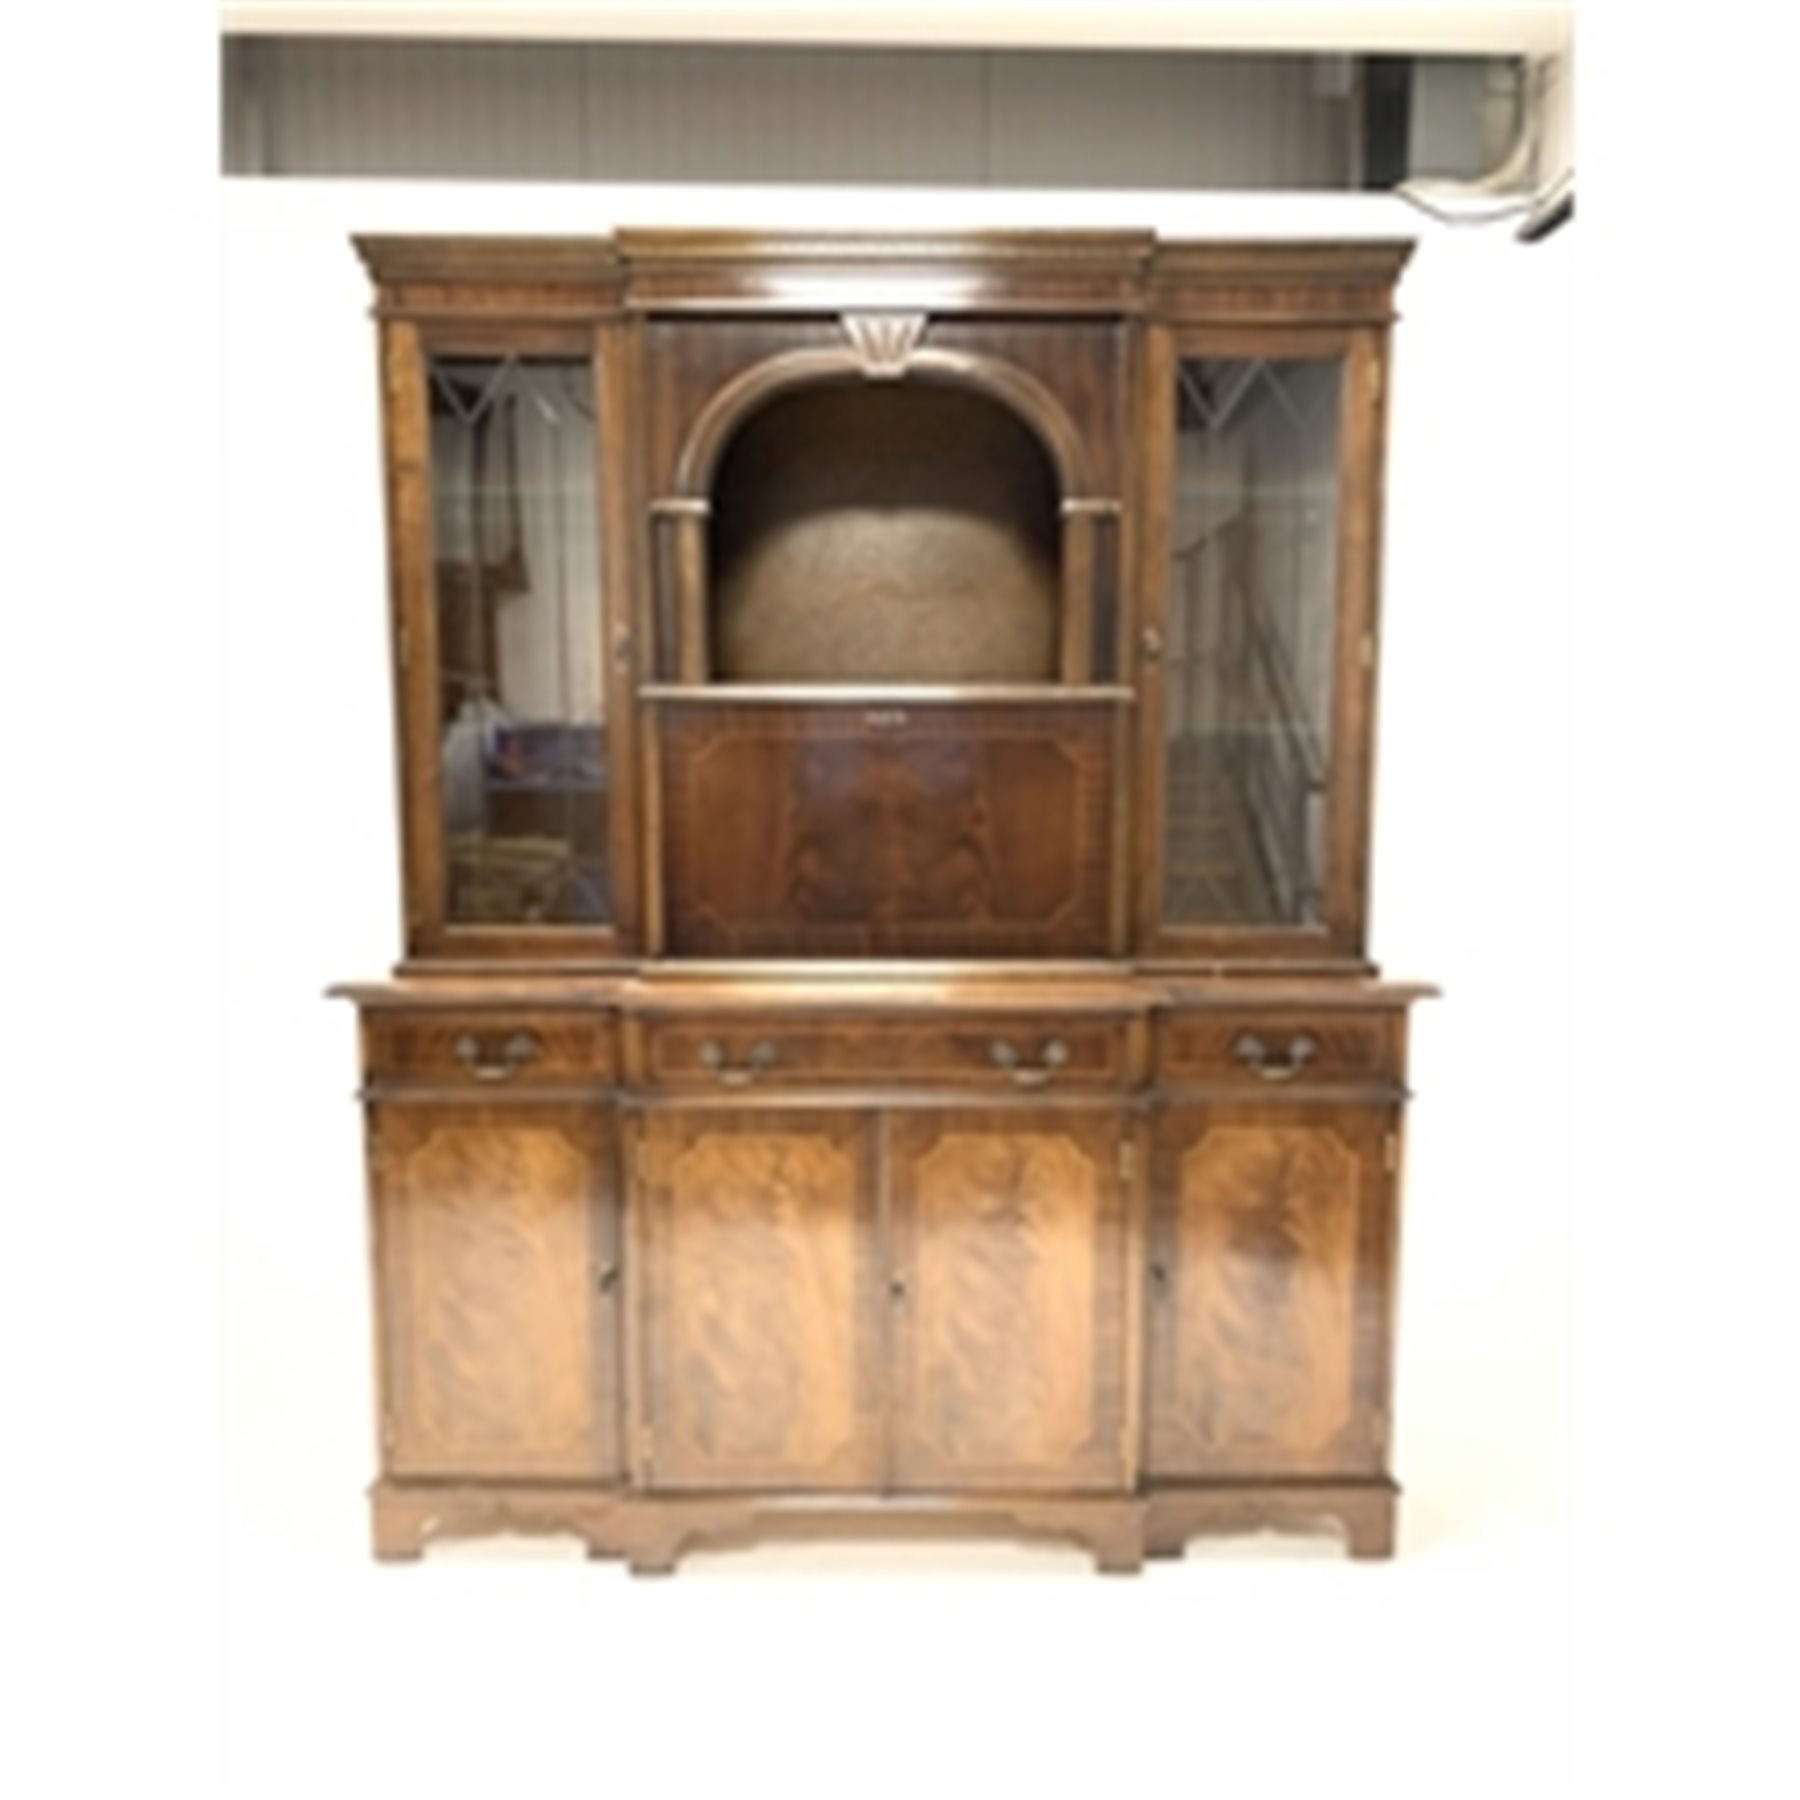 Reproduction mahogany breakfront illuminated cocktail display cabinet, with dentil cornice over glaz